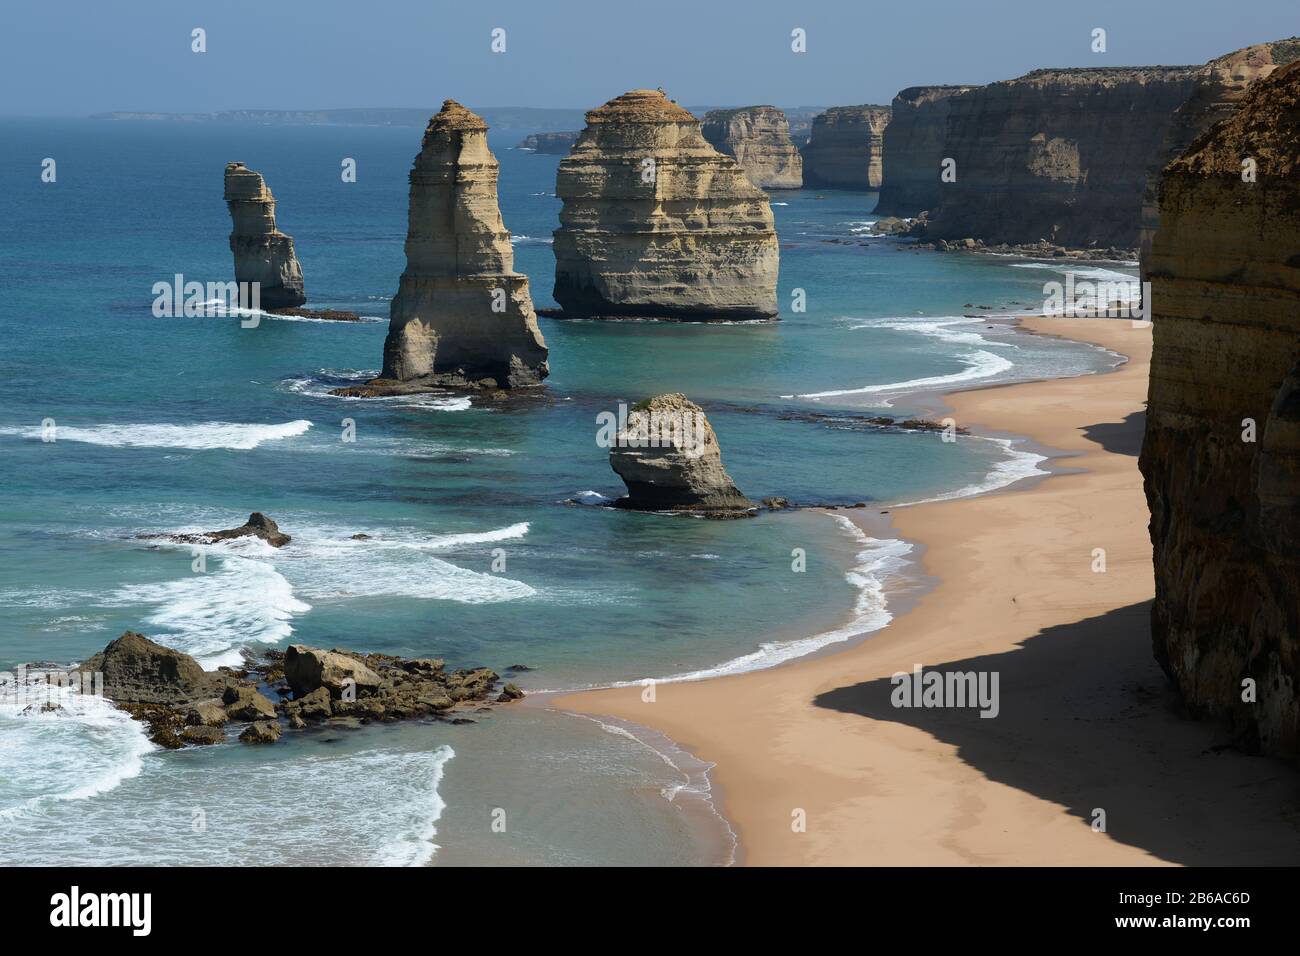 The Twelve Apostles are one of the world's most distinctive rock formations located on the Great Ocean Road, Victoria, Australia. Stock Photo